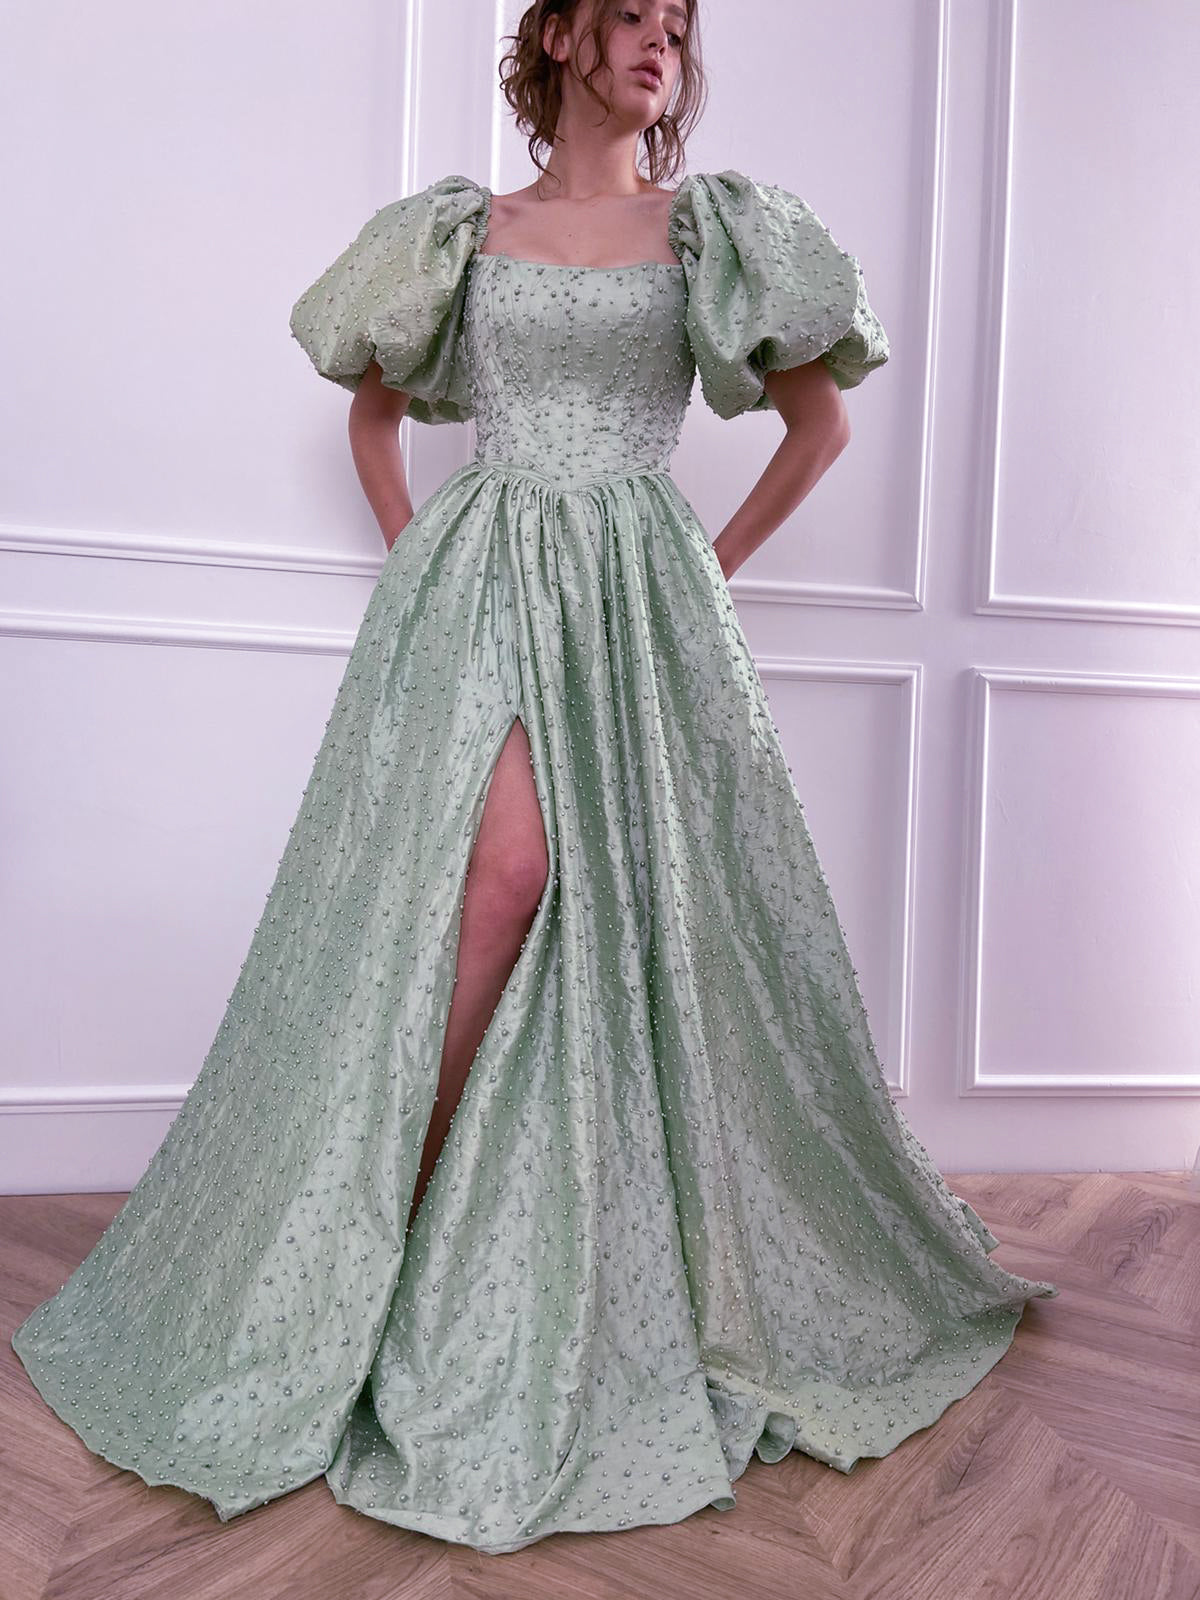 Green A-Line dress with off the shoulder sleeves and beading